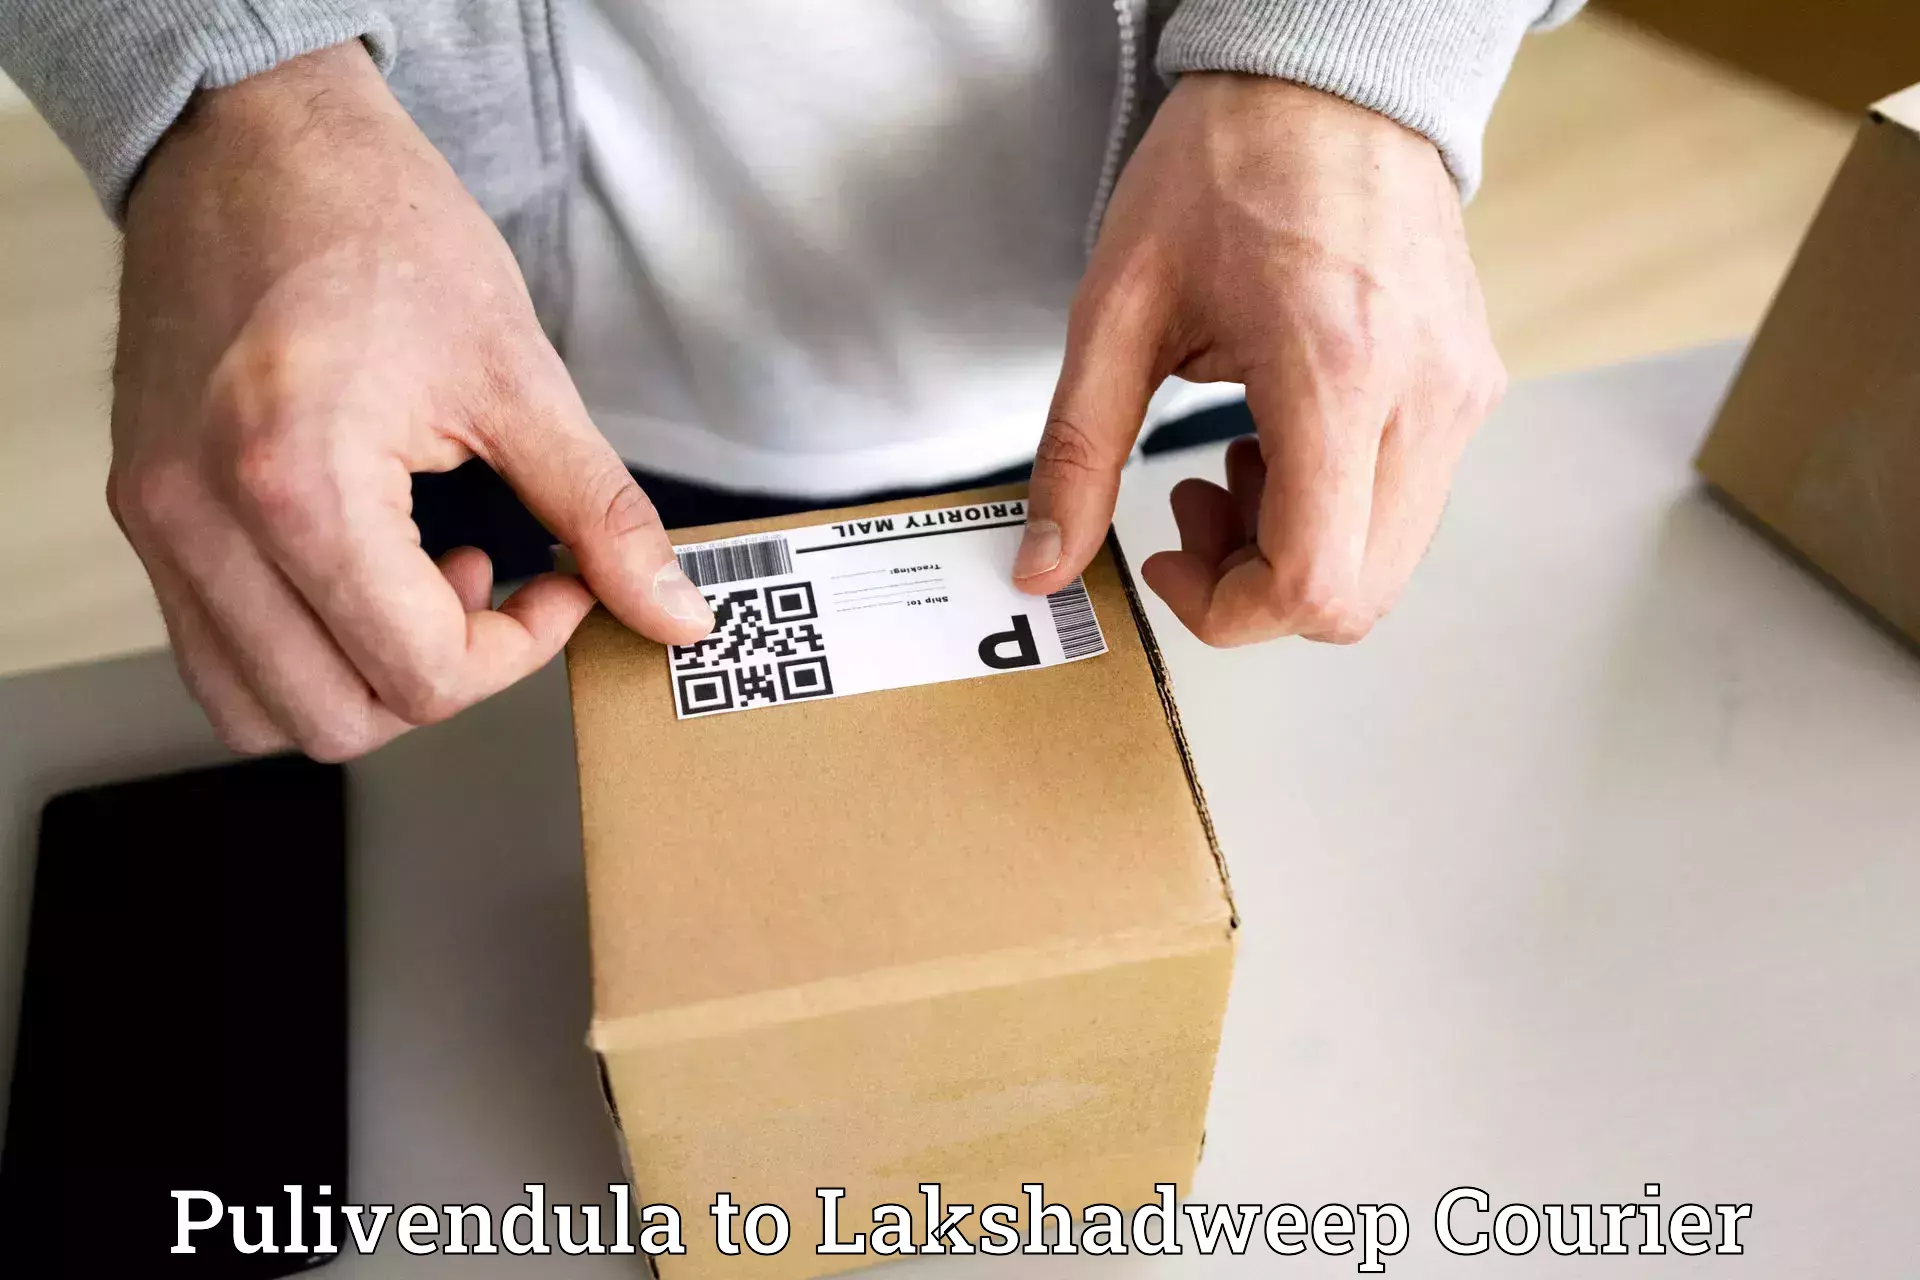 Express delivery network Pulivendula to Lakshadweep